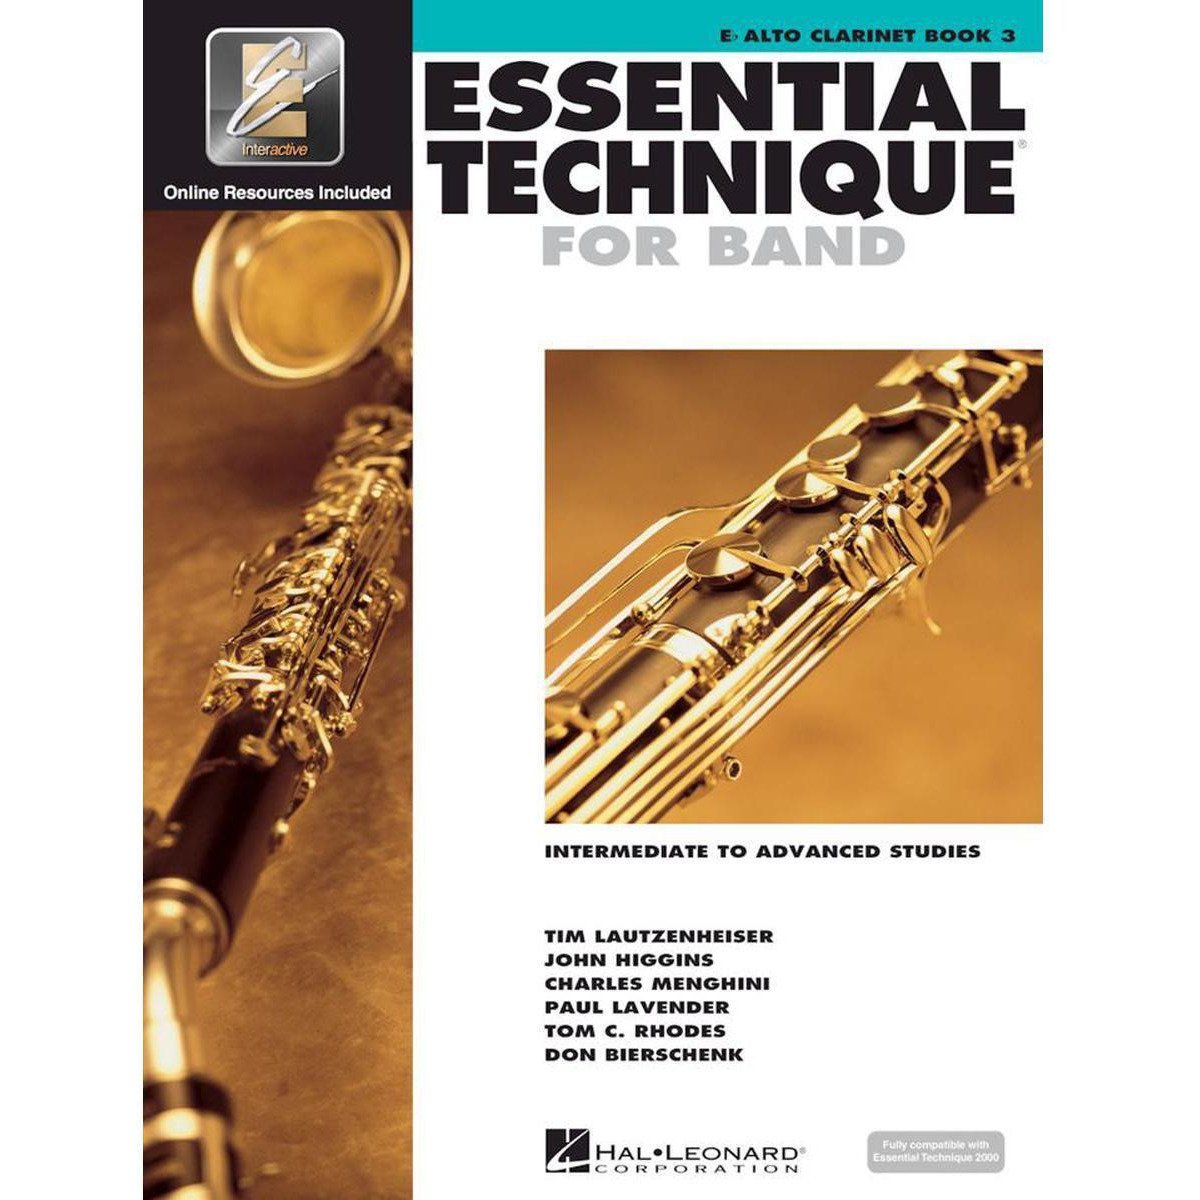 Essential Technique for Band Book 3-Eb Alto Clarinet-Andy's Music